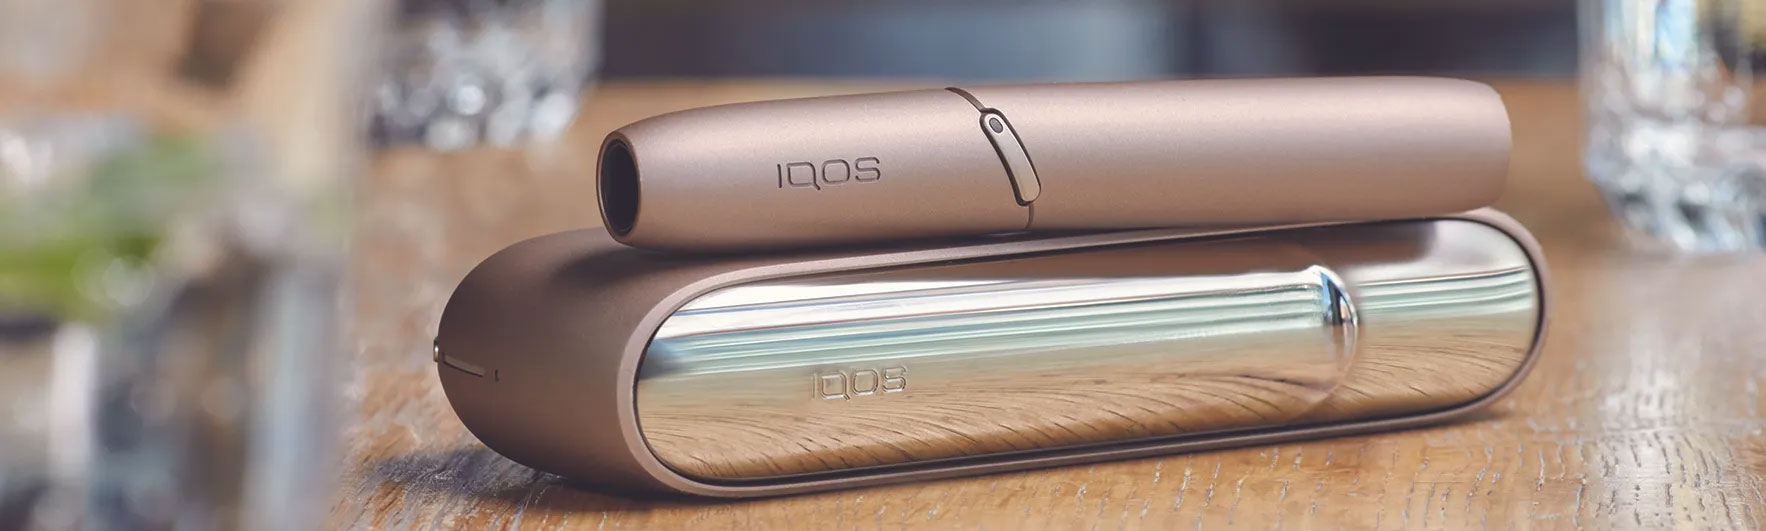 IQOS DUO is now available at an unbeatable new IQOS Kuwait